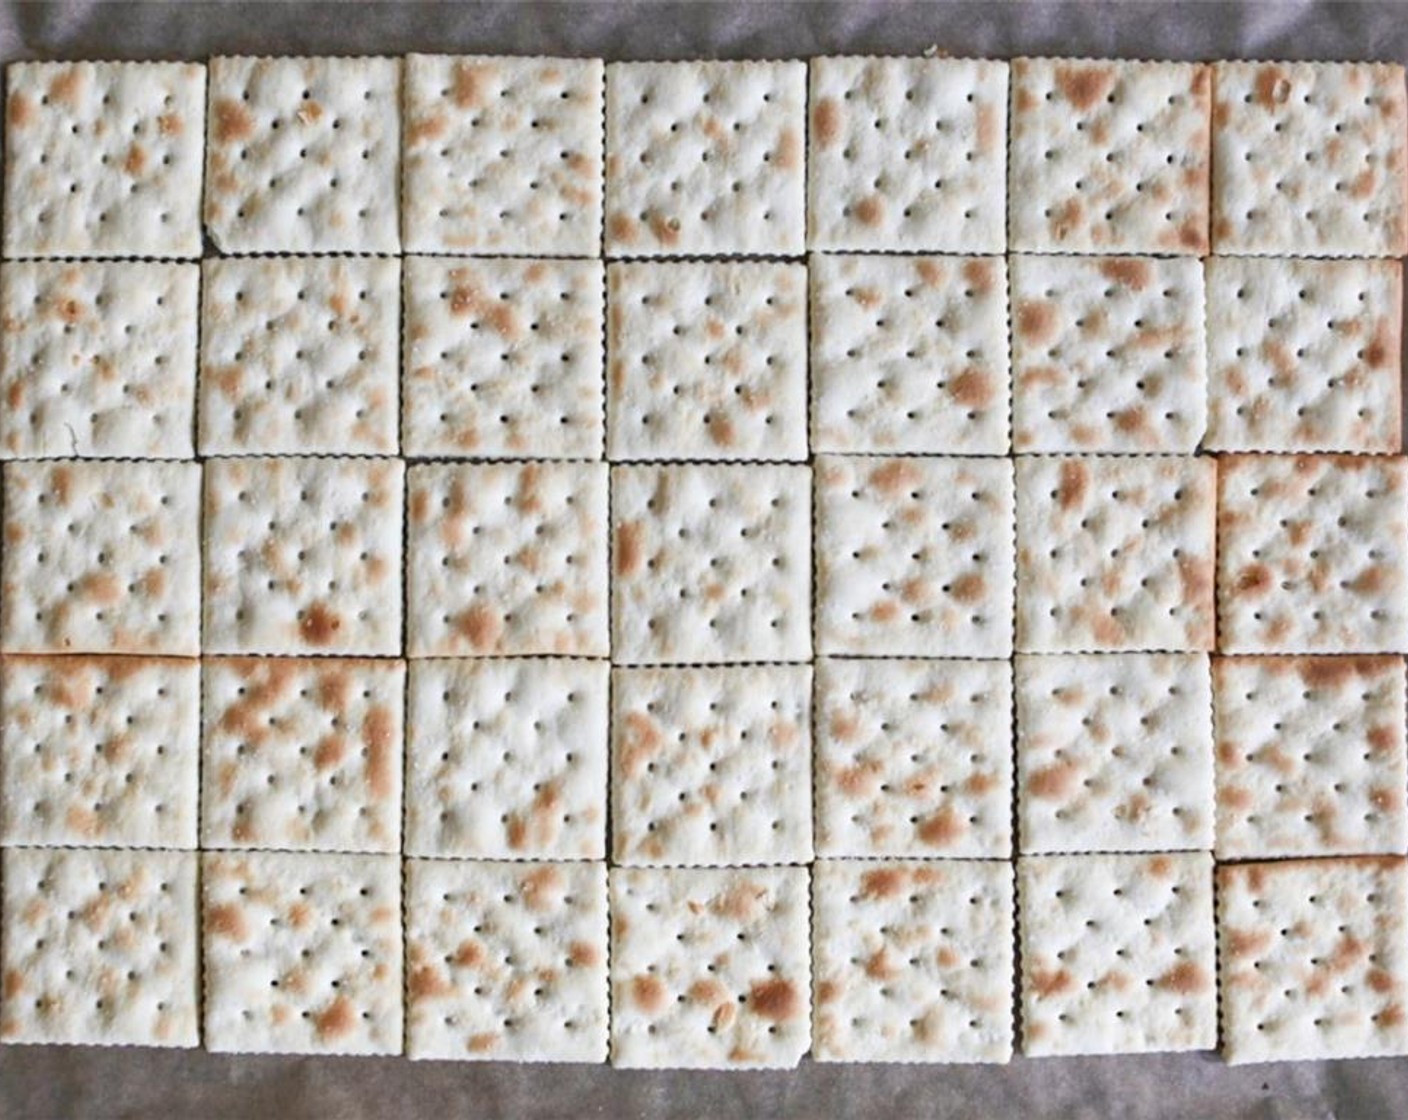 step 2 Arrange the Saltine Crackers (35) in a rectangle on the prepared baking sheet.